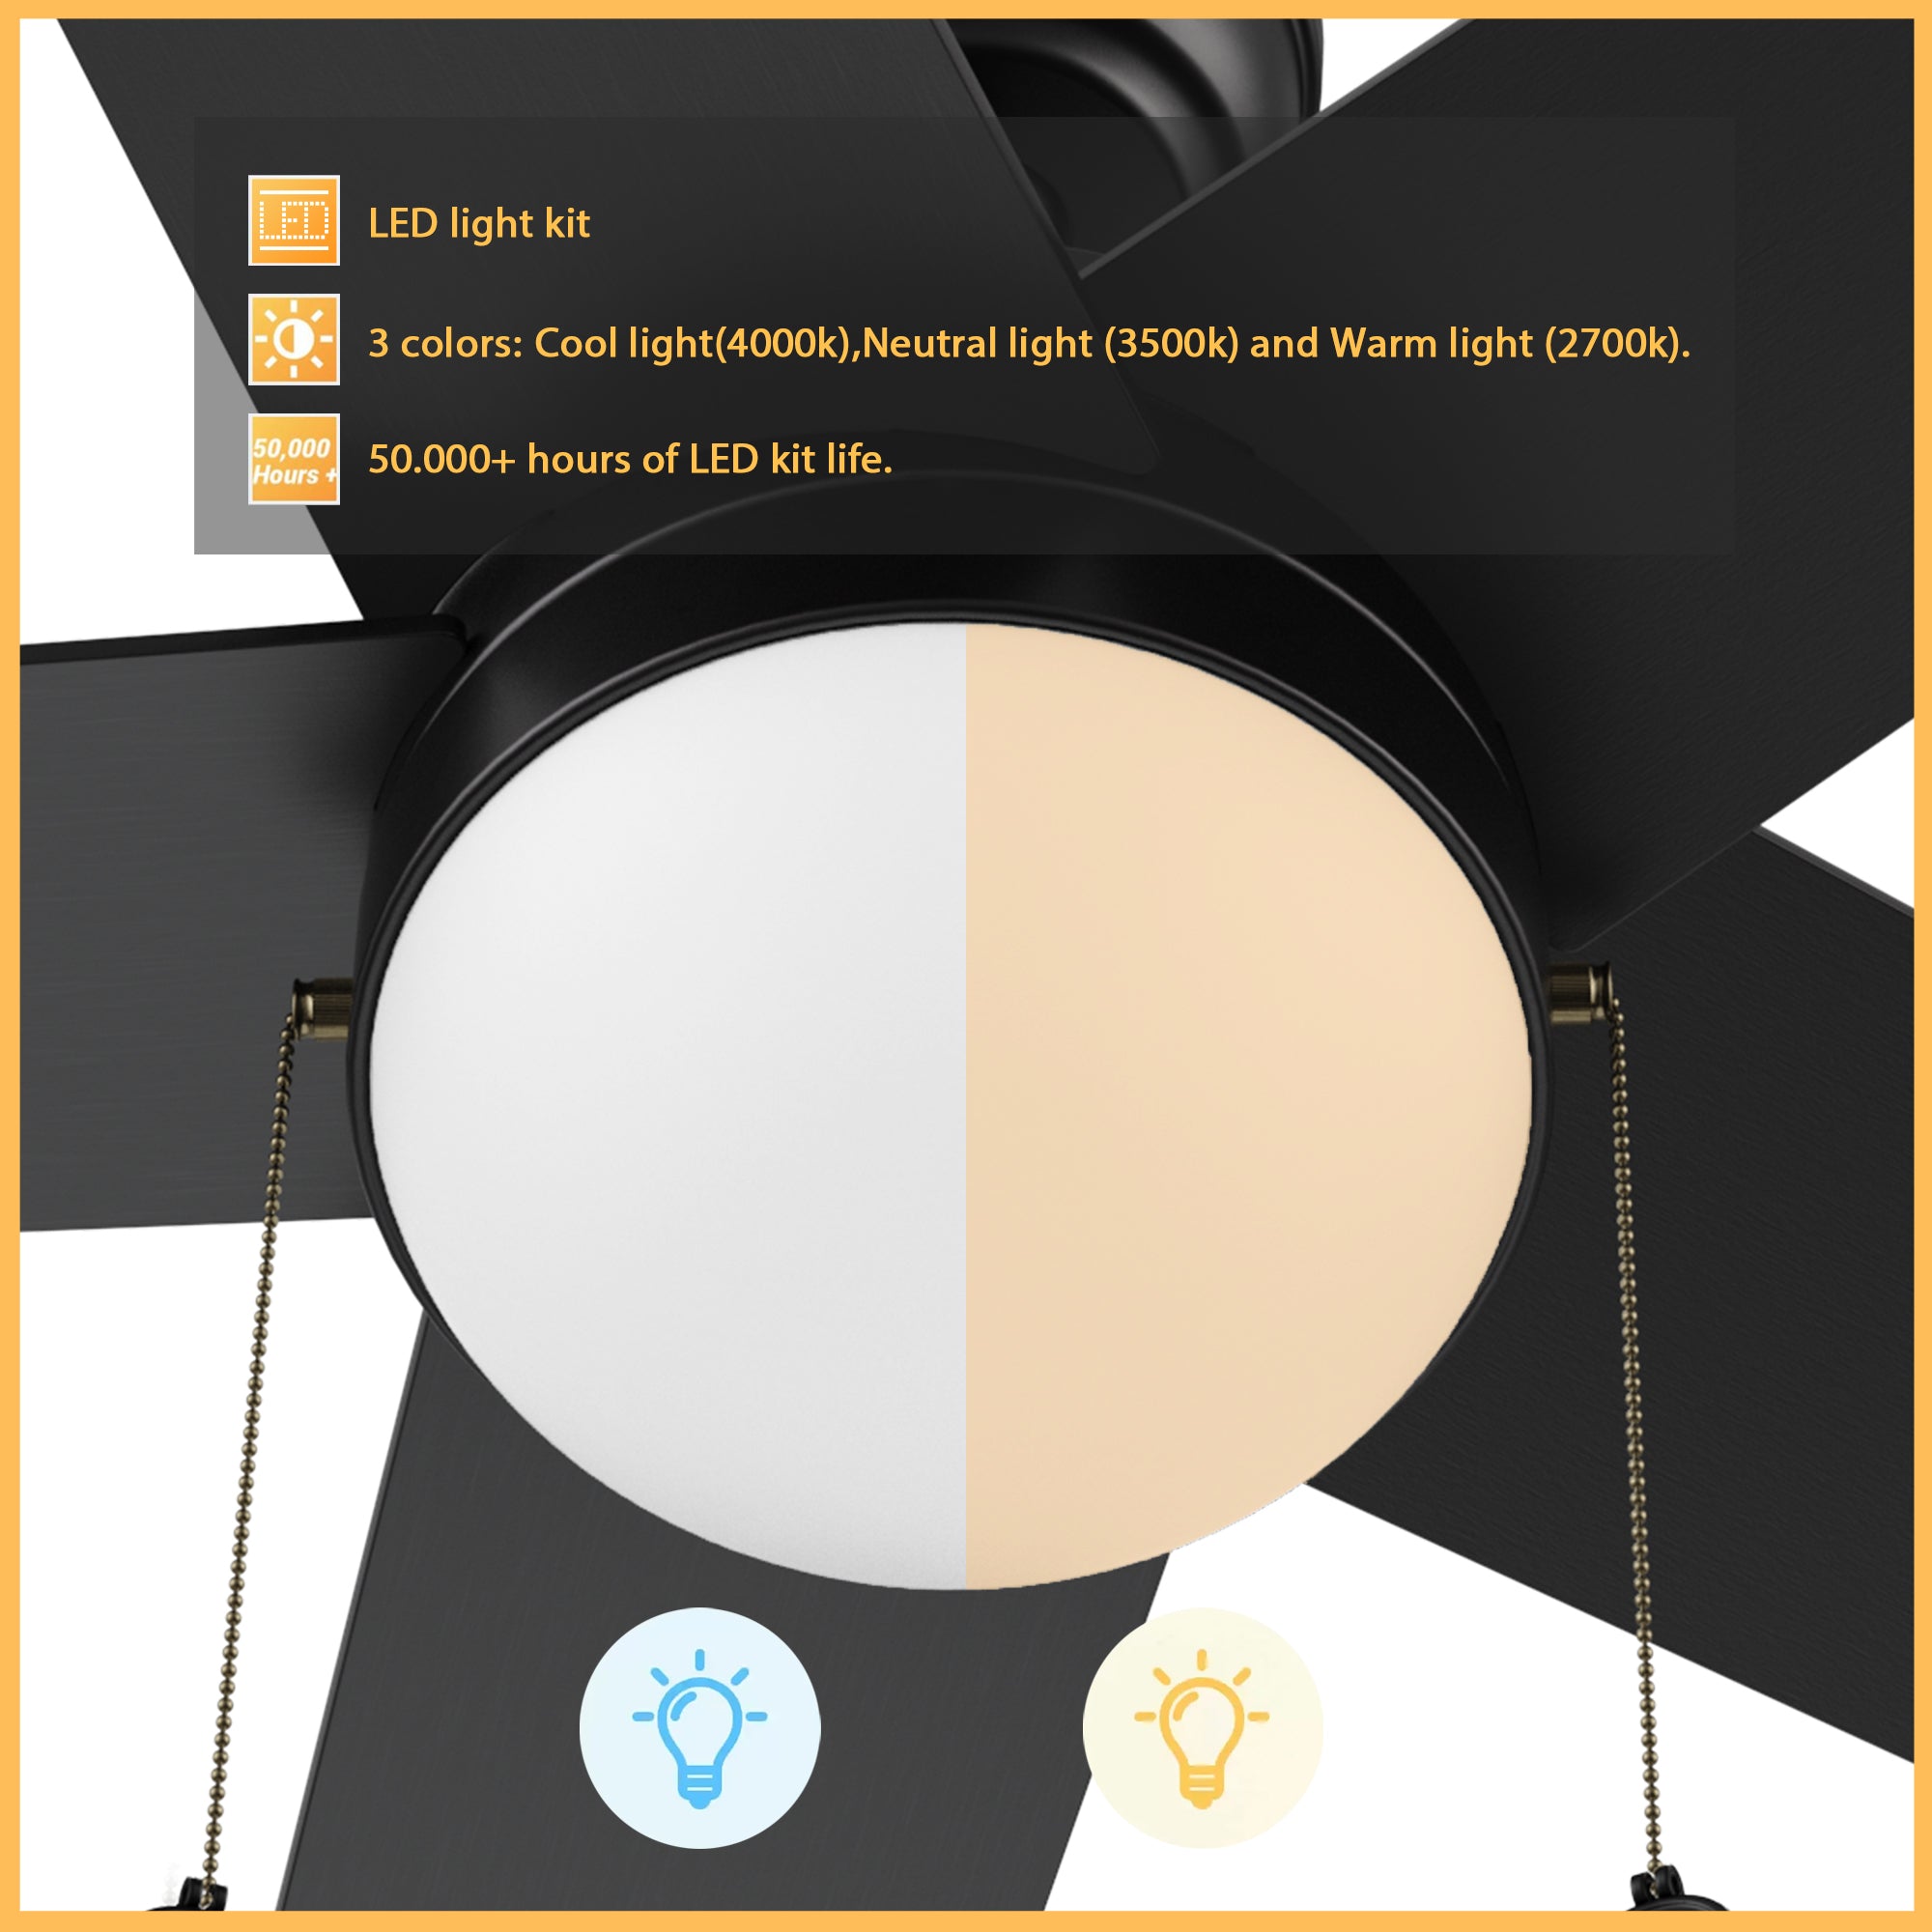 52-inch black ceiling fan with LED light kit, 18 energy power, and 1300 lumens brightness output. With more than 50000 hours of LED kit life, this ceiling fan light provides 3 colors from 2700K warm light to 4000K cool light. 